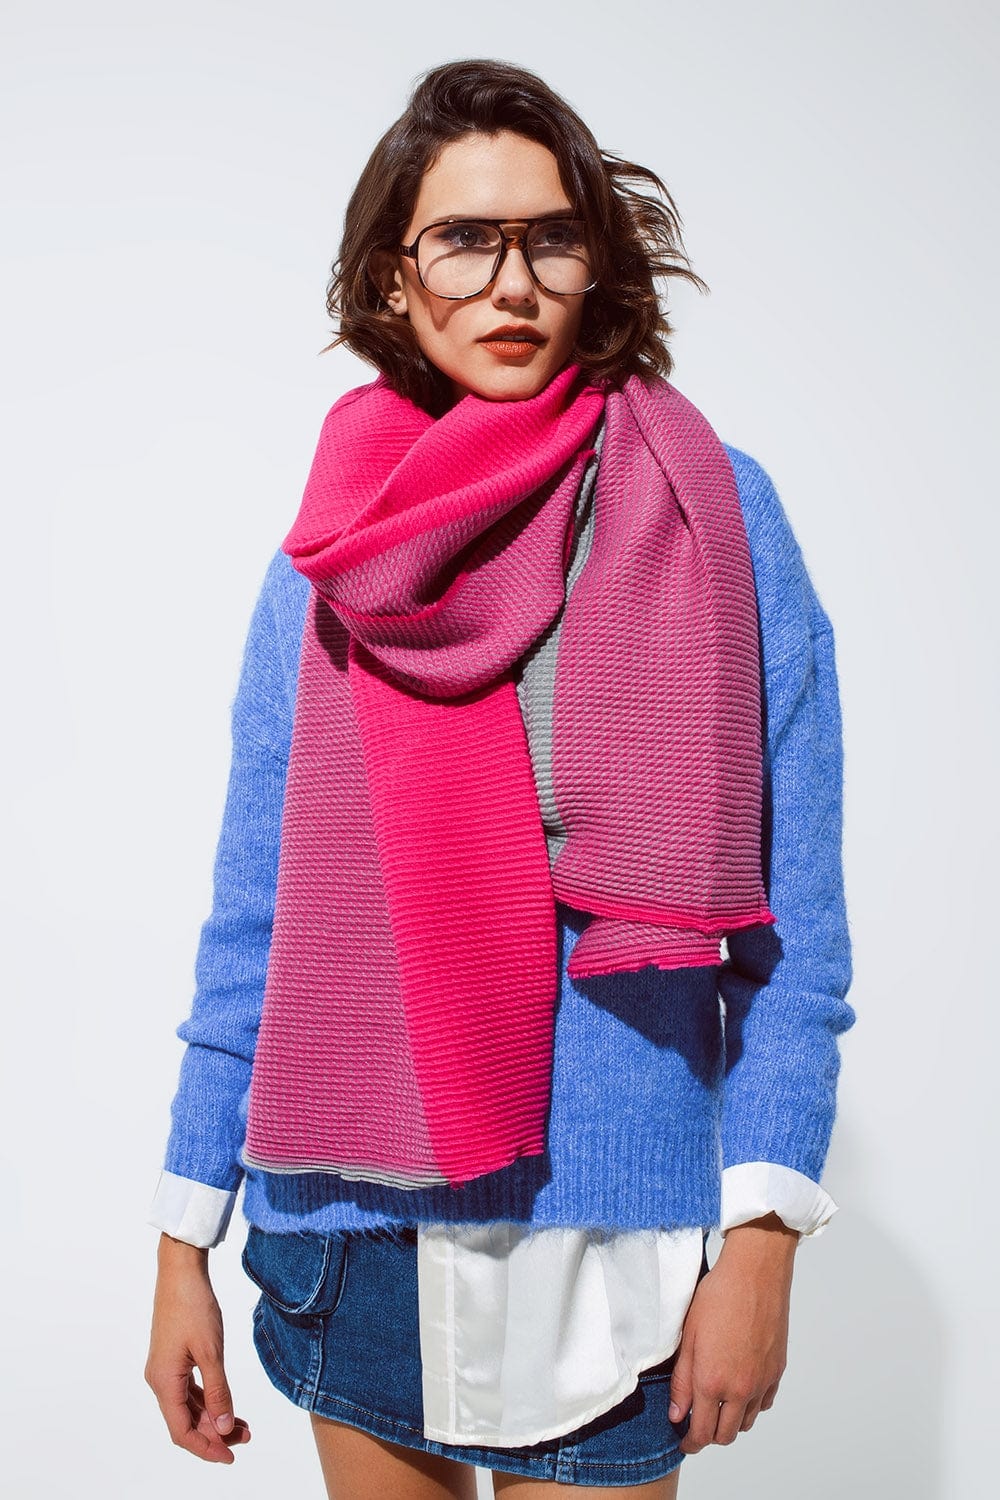 Q2 Women's Scarves, Wraps, & Gloves One Size / Fuchsia Thin Scarf With Mixed Knits In Shades Of Pink